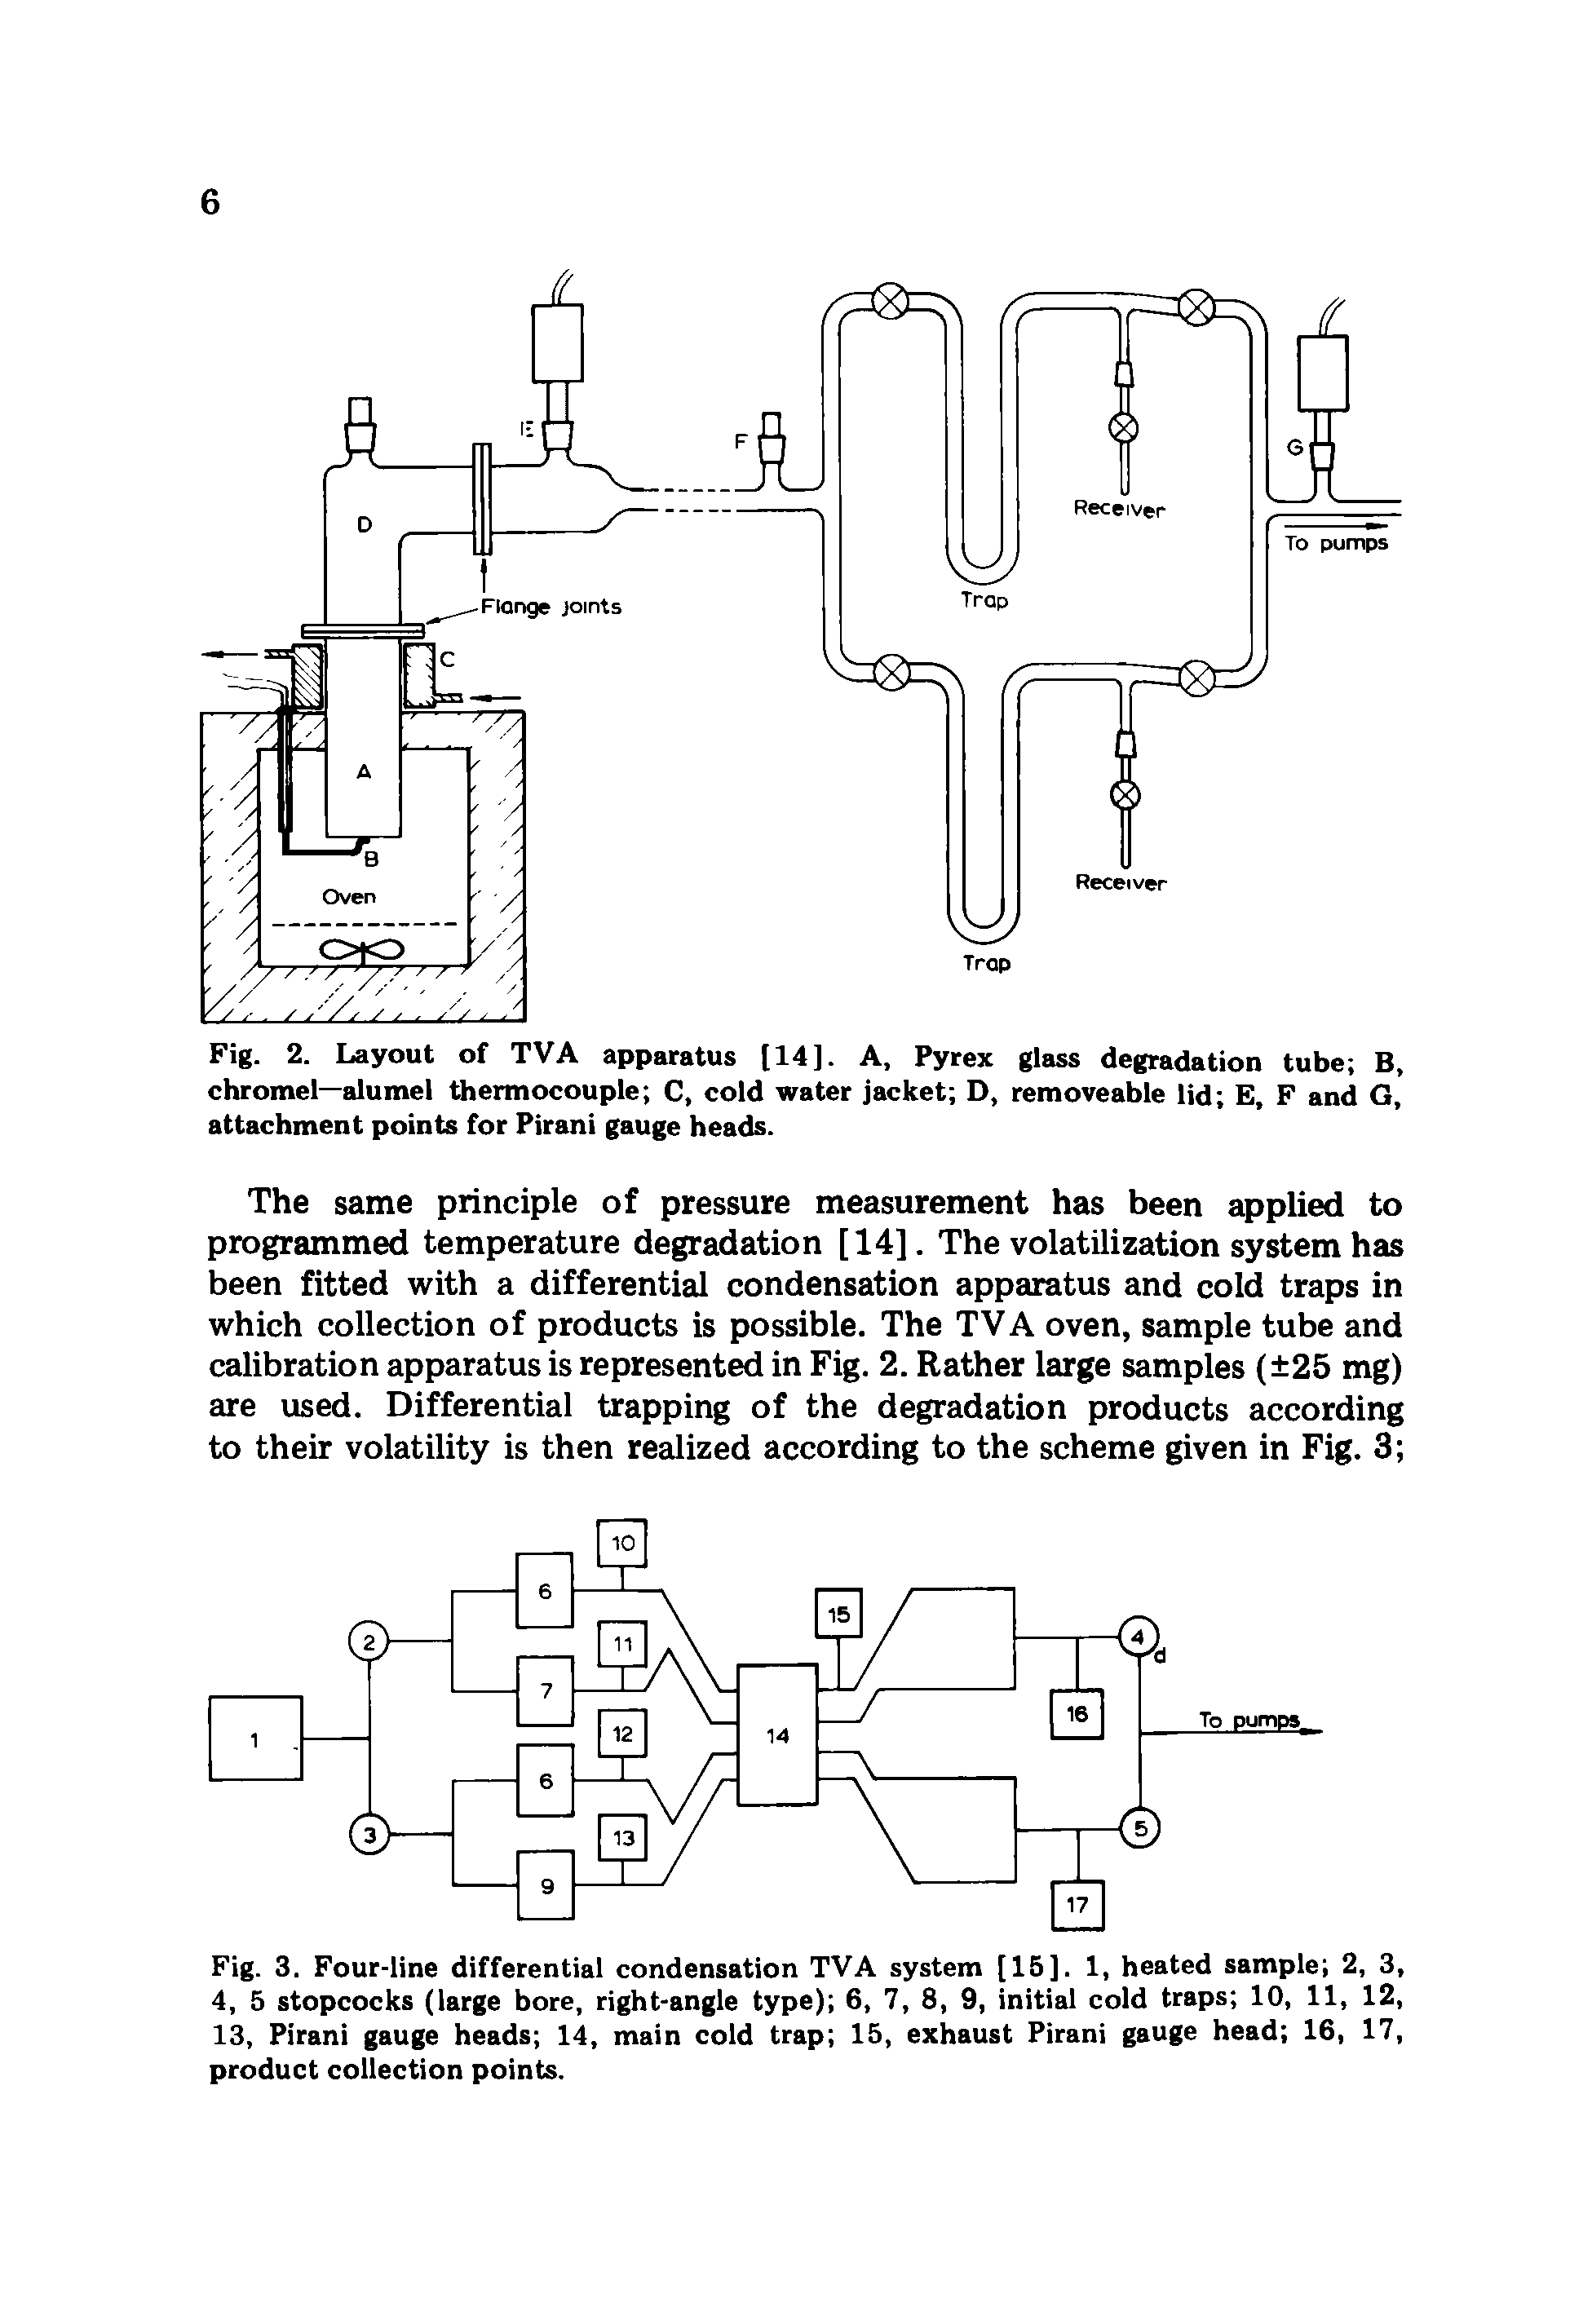 Fig. 3. Four-line differential condensation TVA system [15]. 1, heated sample 2, 3, 4, 5 stopcocks (large bore, right-angle type) 6, 7, 8, 9, initial cold traps 10, 11, 12, 13, Pirani gauge heads 14, main cold trap 15, exhaust Pirani gauge head 16, 17, product collection points.